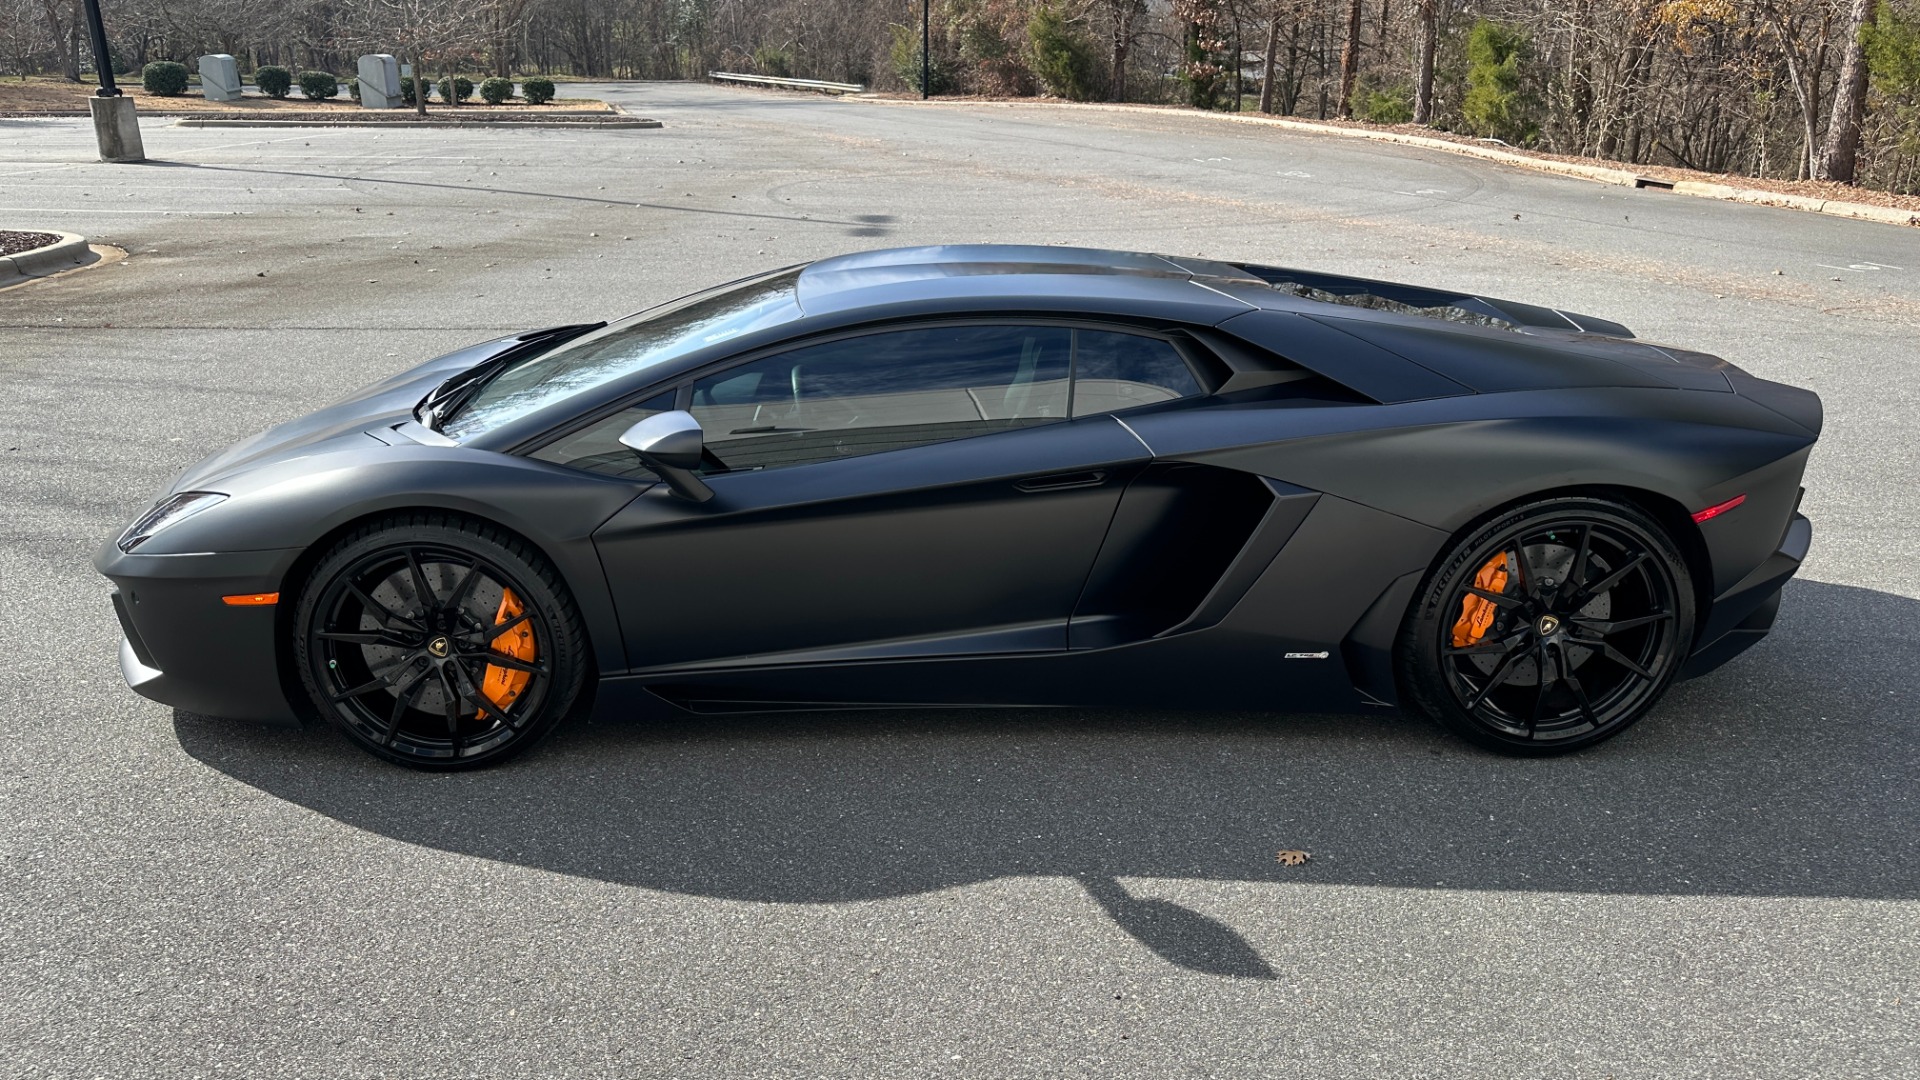 Used 2013 Lamborghini Aventador LP 700-4 / FULL PAINT PROTECTION / MATTE PAINT / FORGED WHEELS / GLASS ENGI for sale $311,000 at Formula Imports in Charlotte NC 28227 4